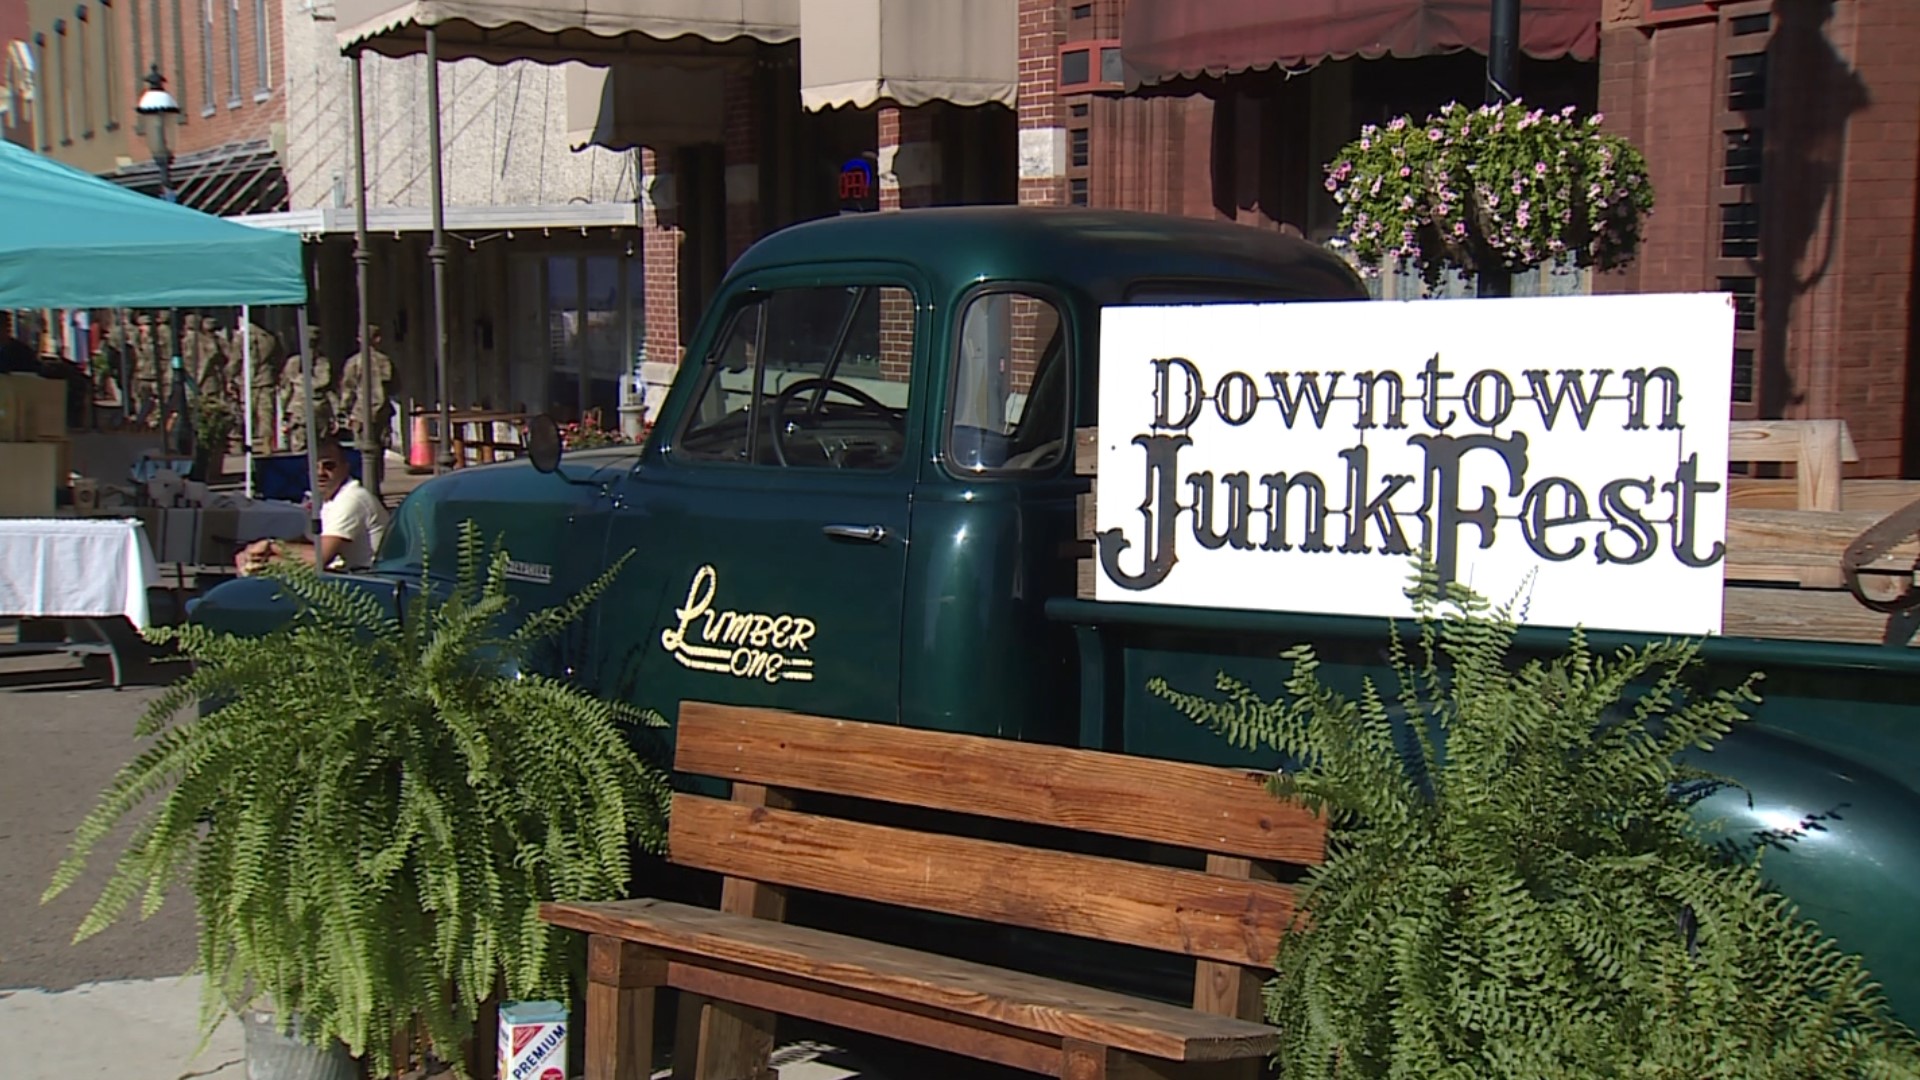 The Van Buren Junkfest features antiques, vintage clothing jewelry and more.